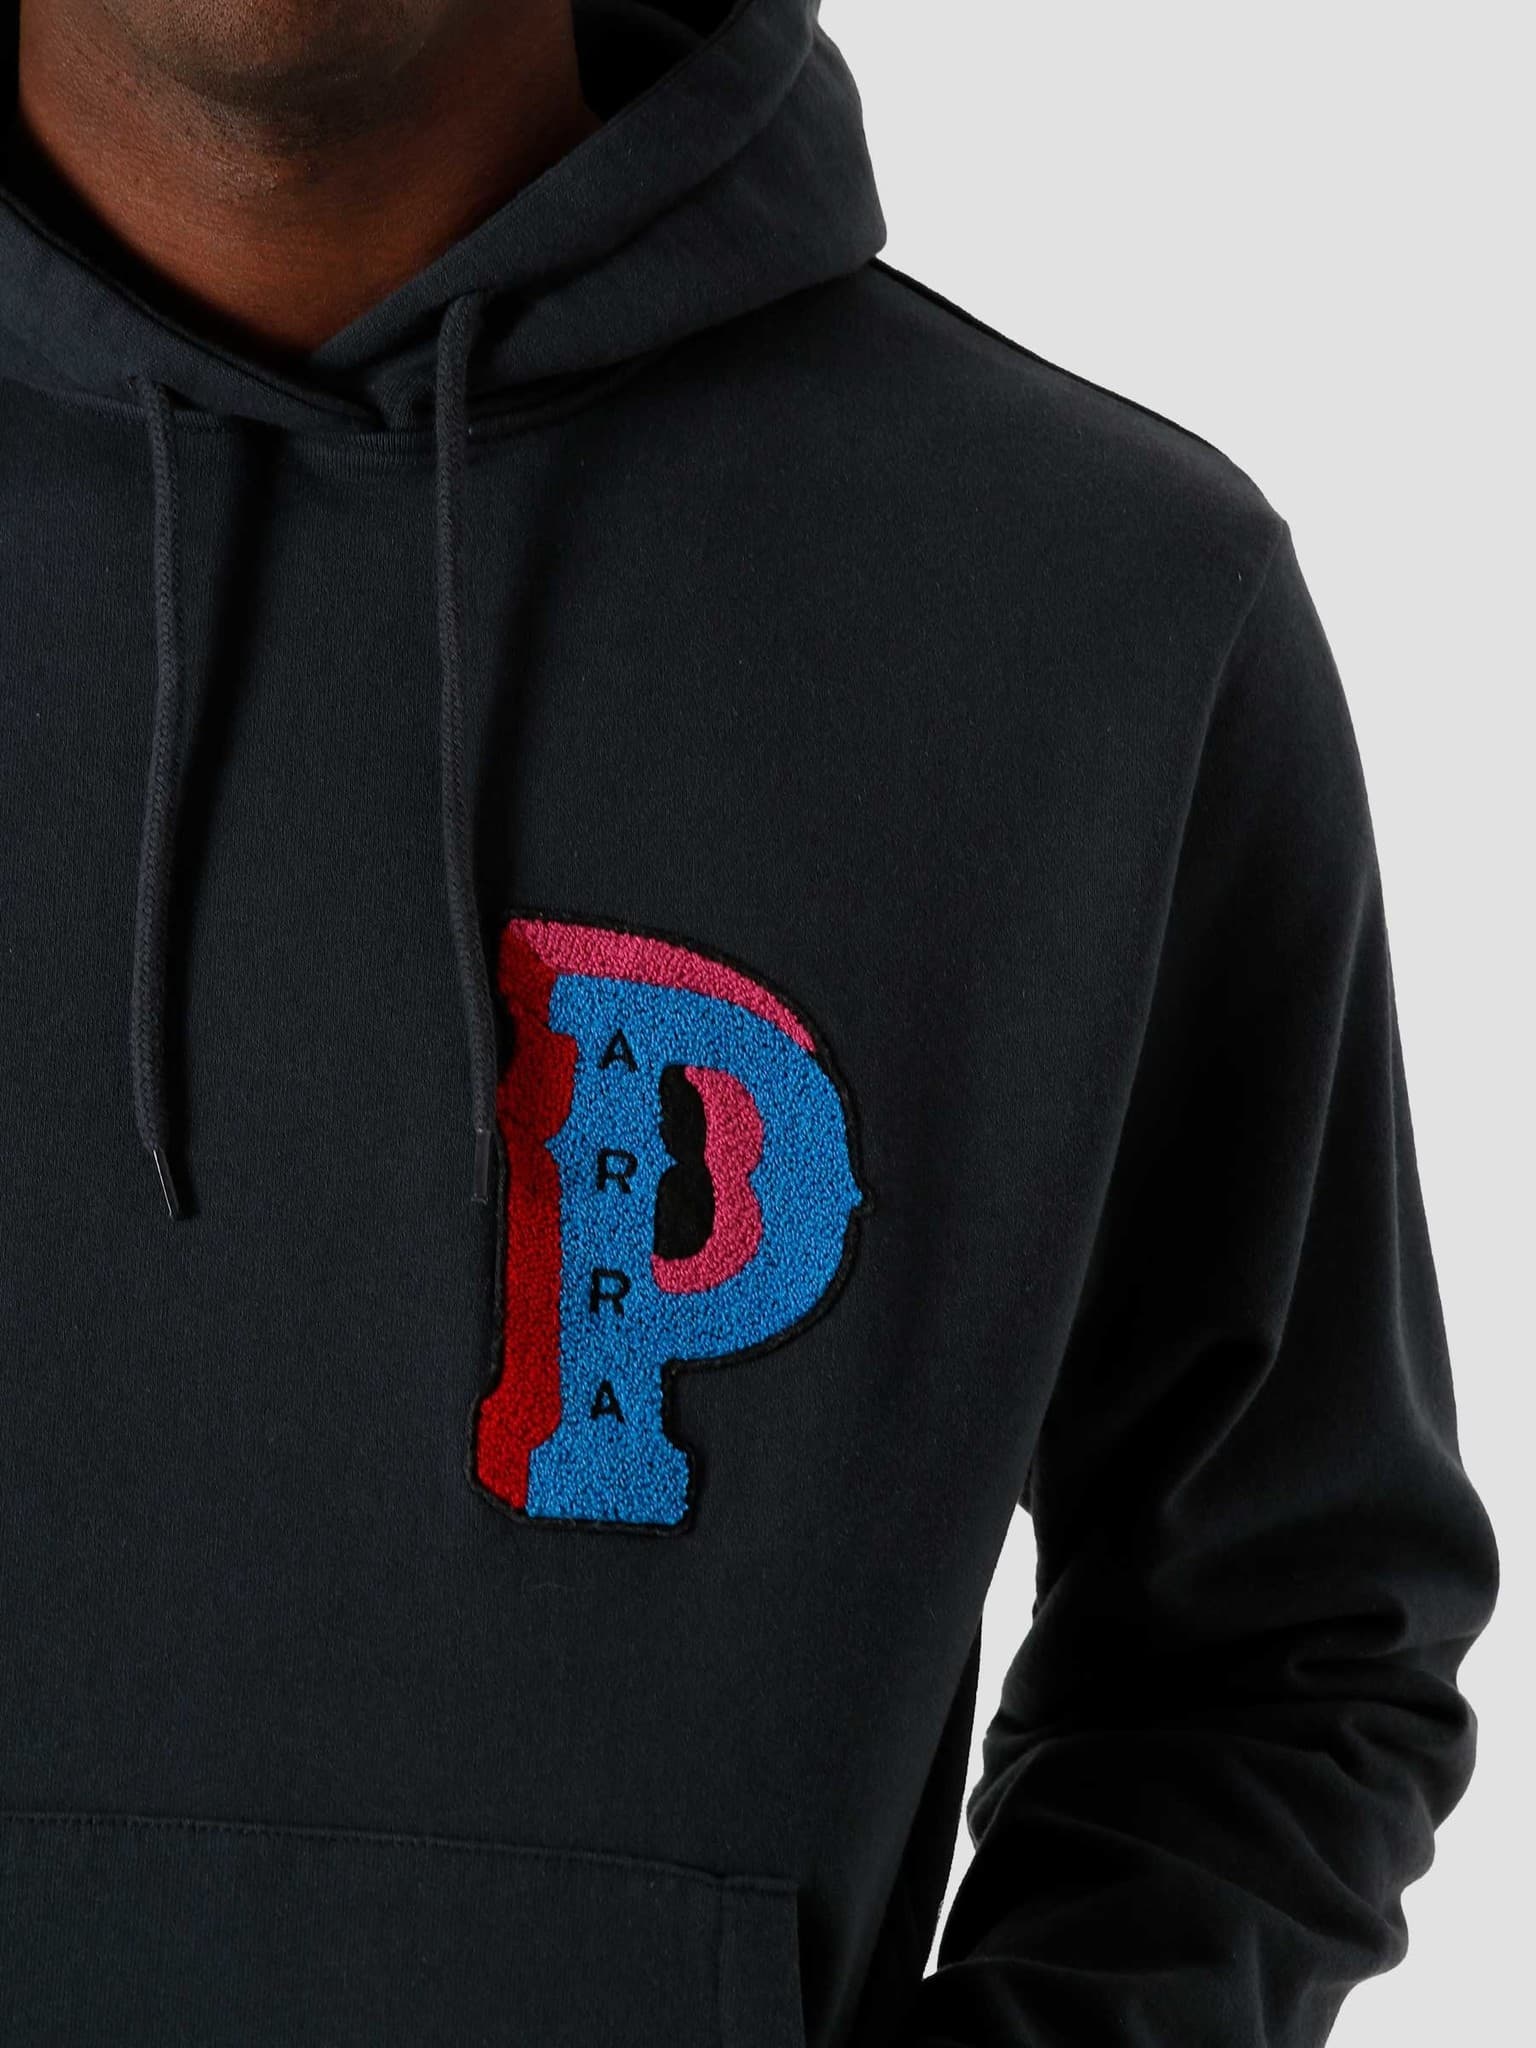 Dropped Out Hooded Sweatshirt Navy Blue 45080